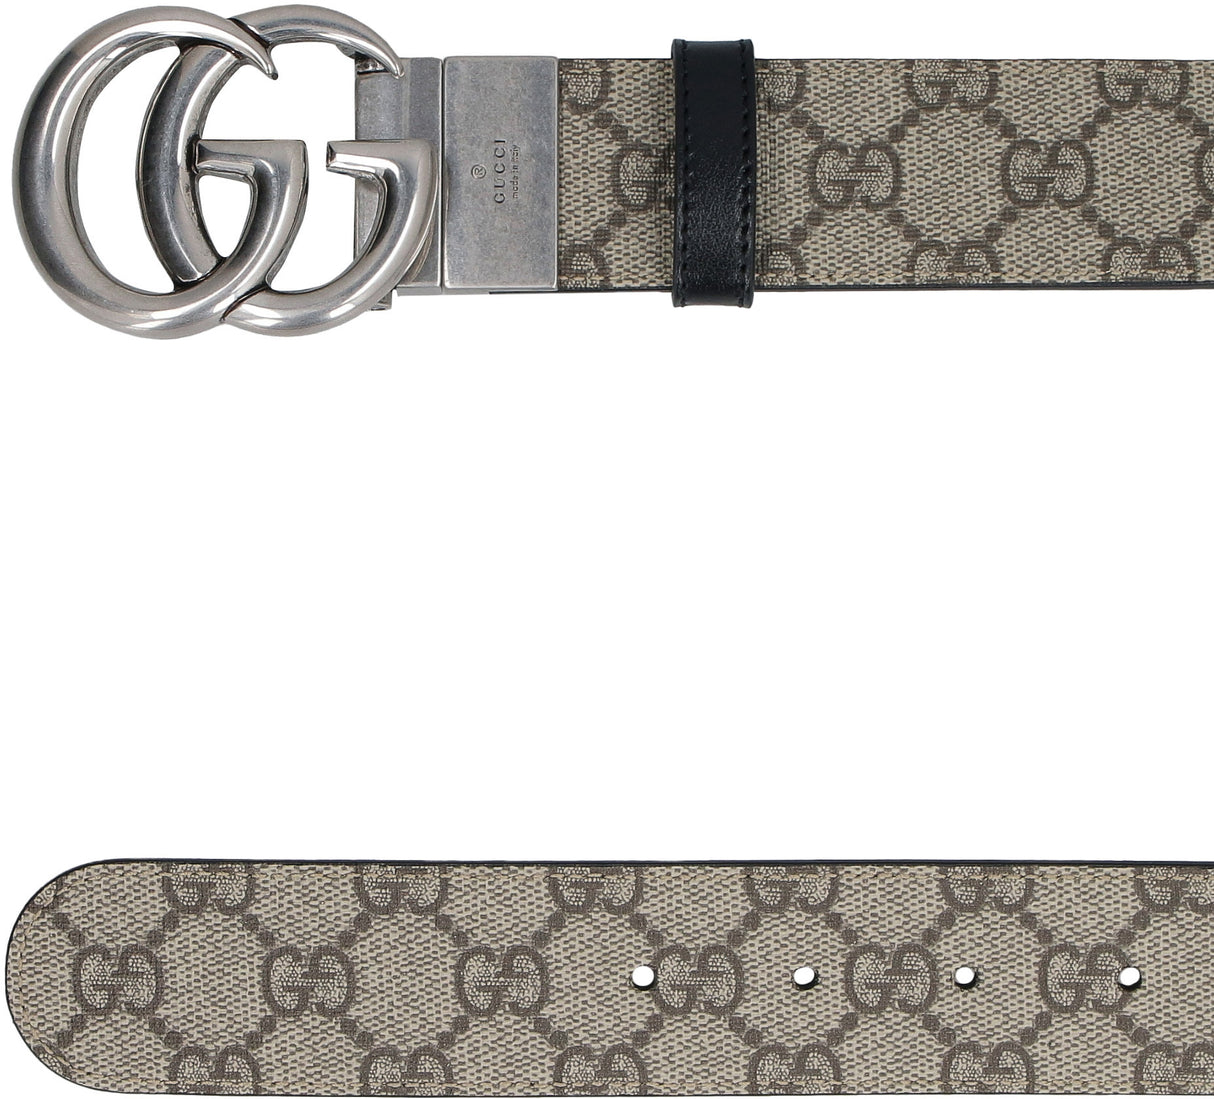 GUCCI Reversible Belt with GG Marmont Logo and Adjustable Design